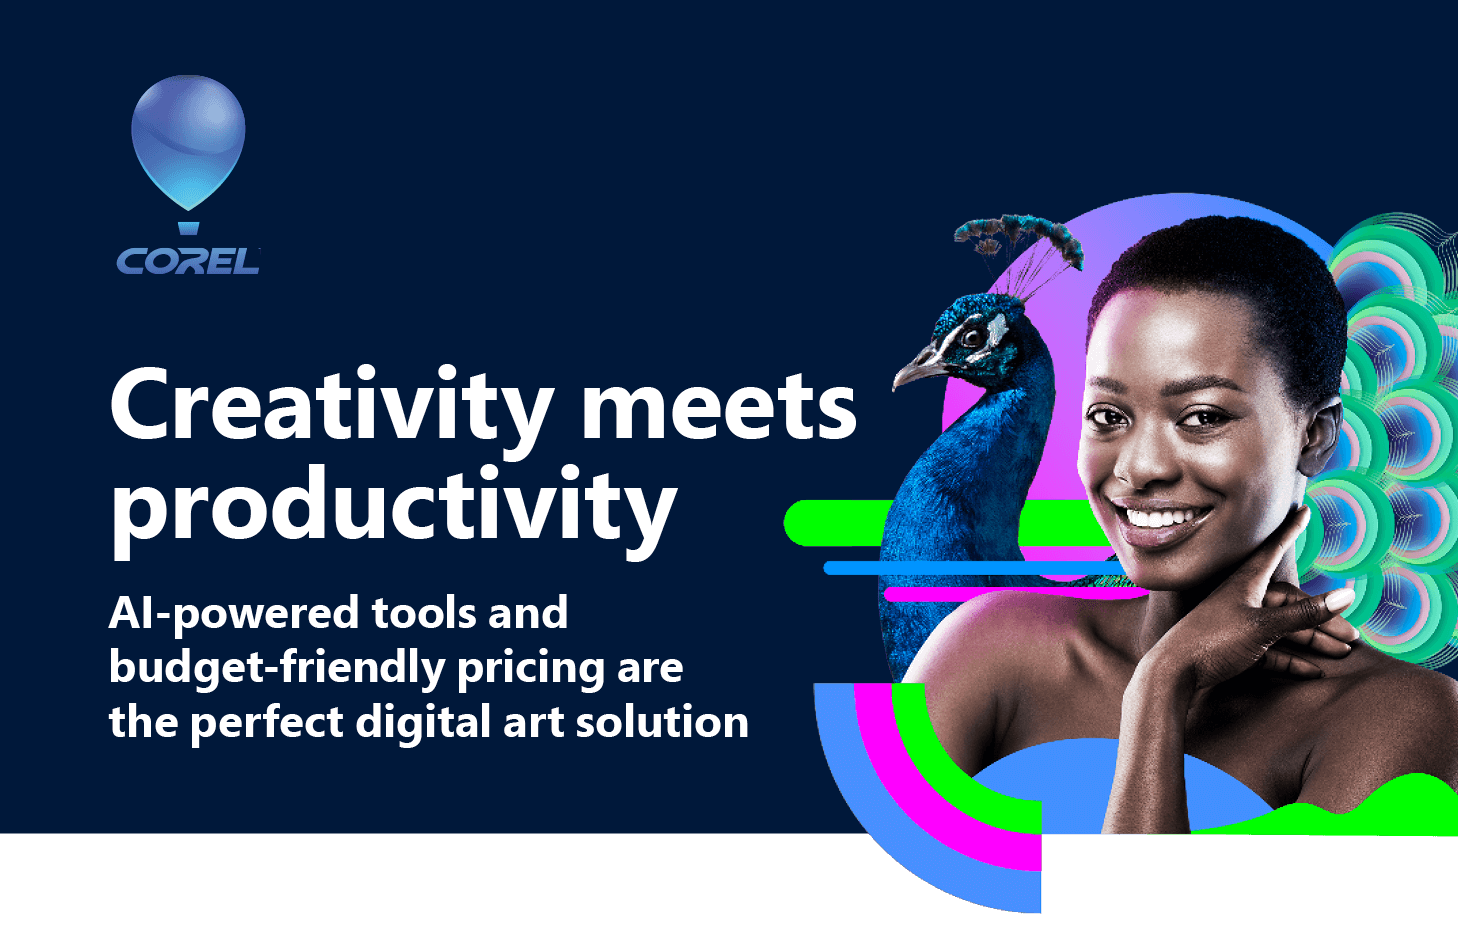 Creativity meets productivity. AI-powered tools and budget-friendly pricing are the perfect digital art solution.